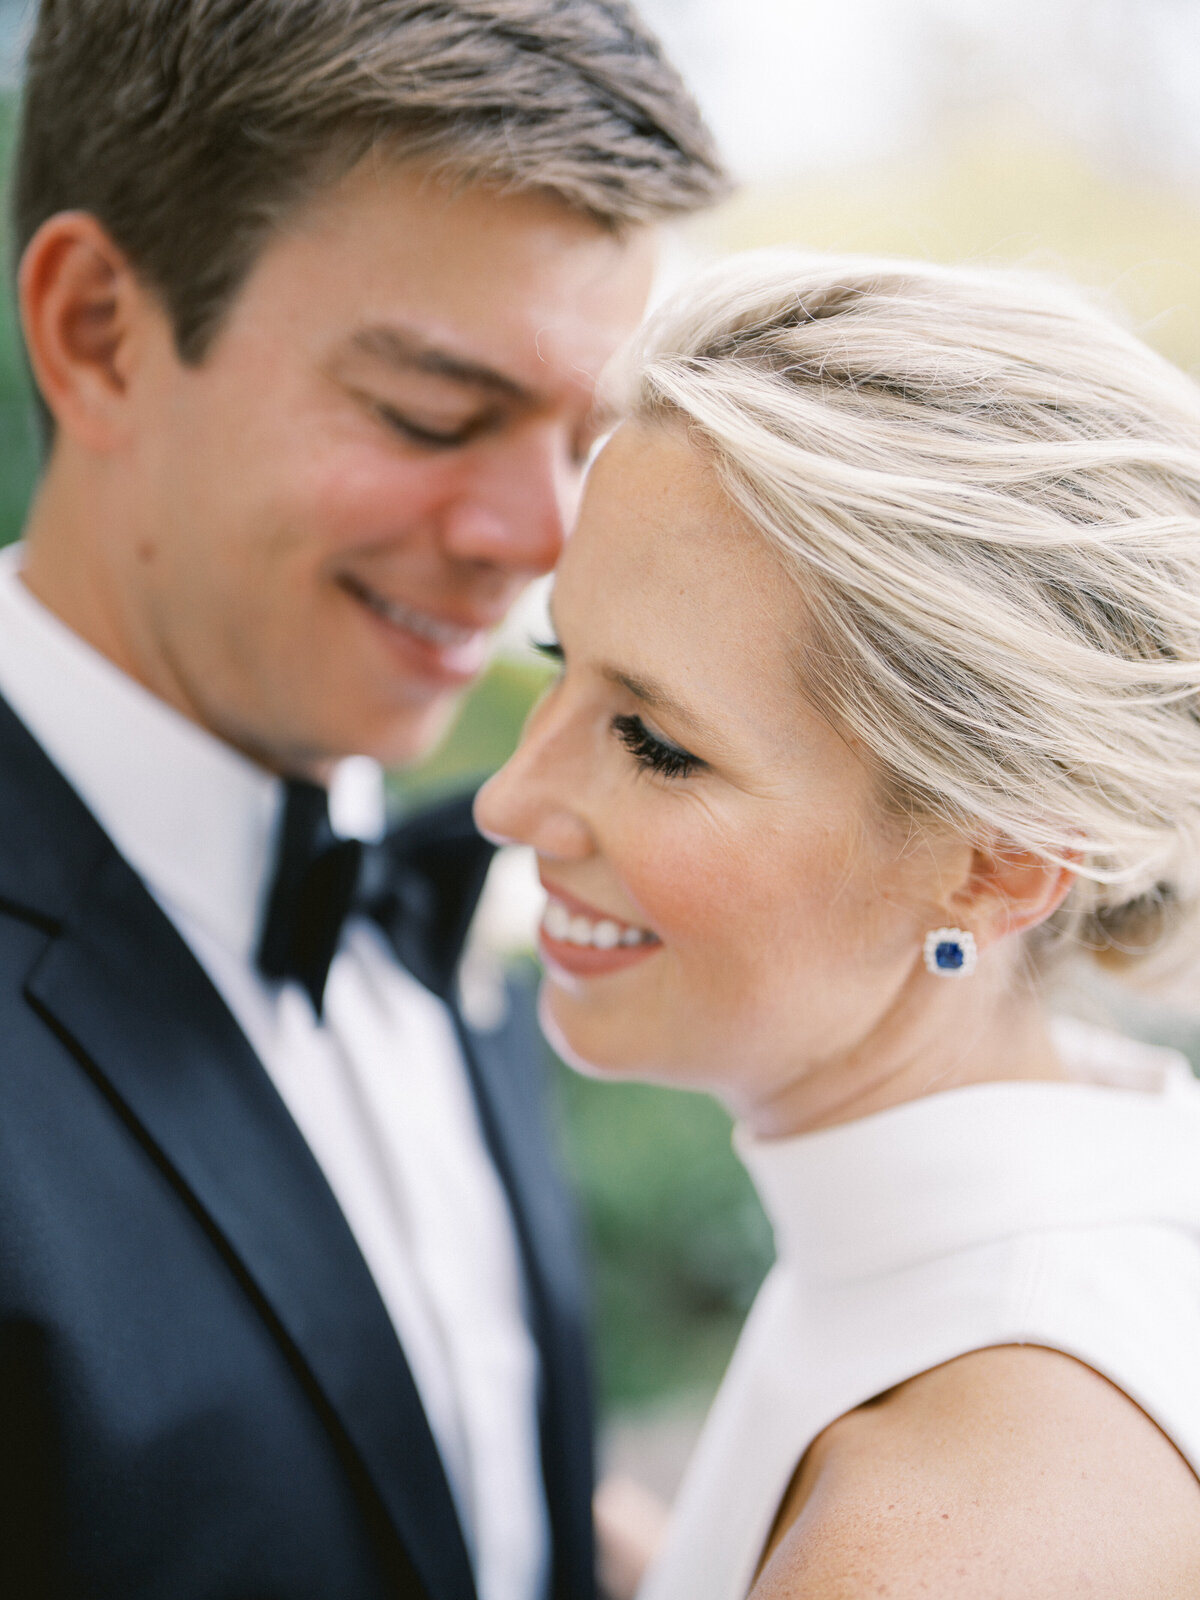 bride with loose updo hair and sapphire earrings wedding photography